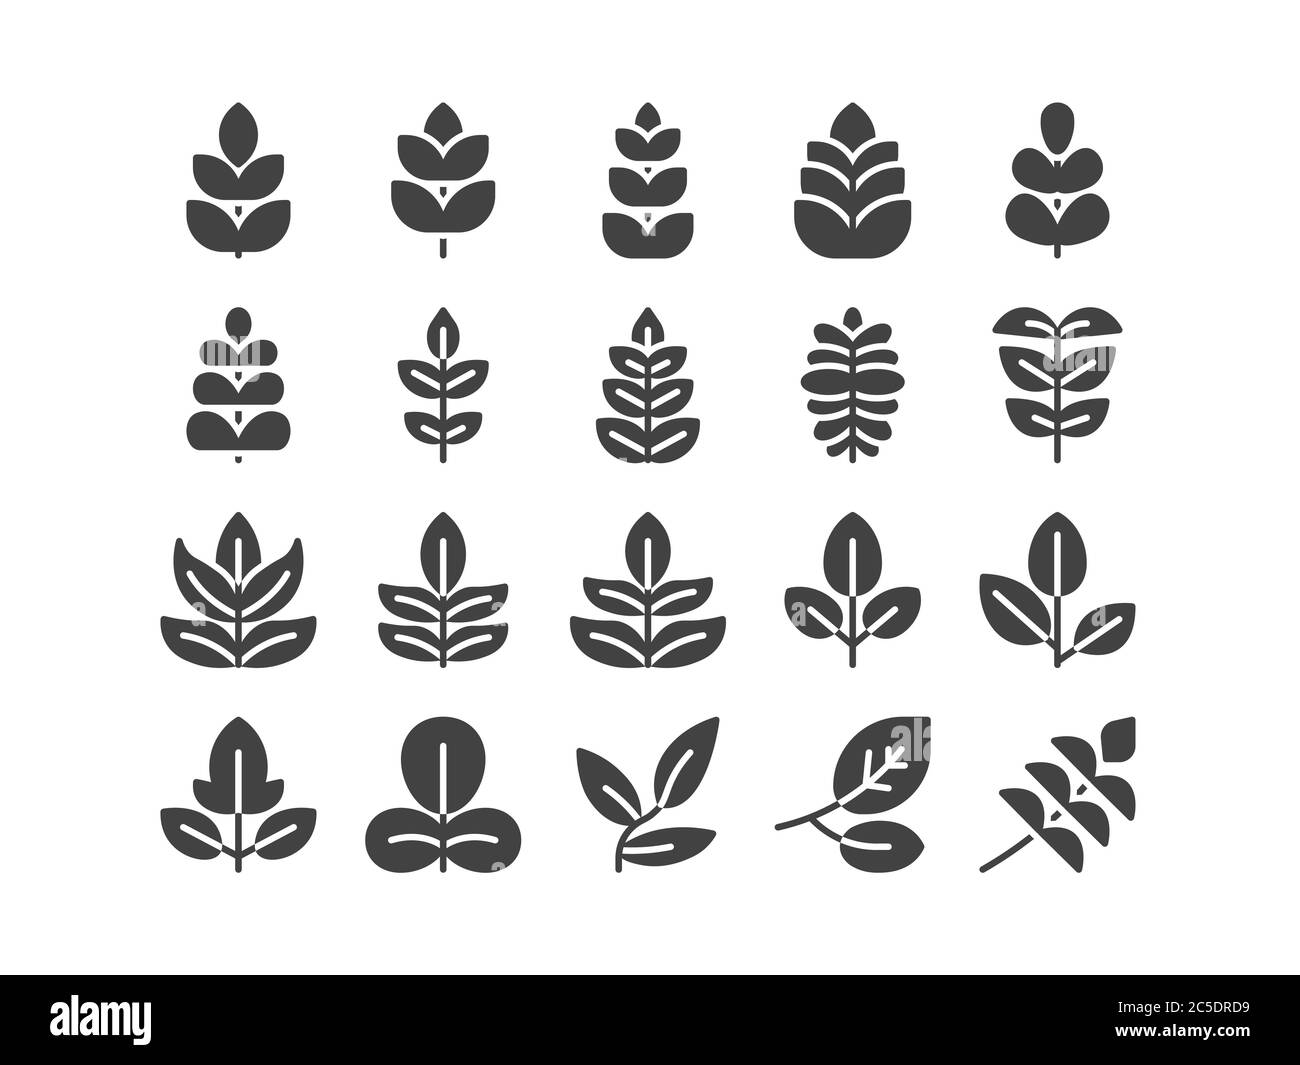 Compound Leaf Solid Glyph Icon Set Spring Concept Luxury Illustration Vector EPS 10. Stock Vector